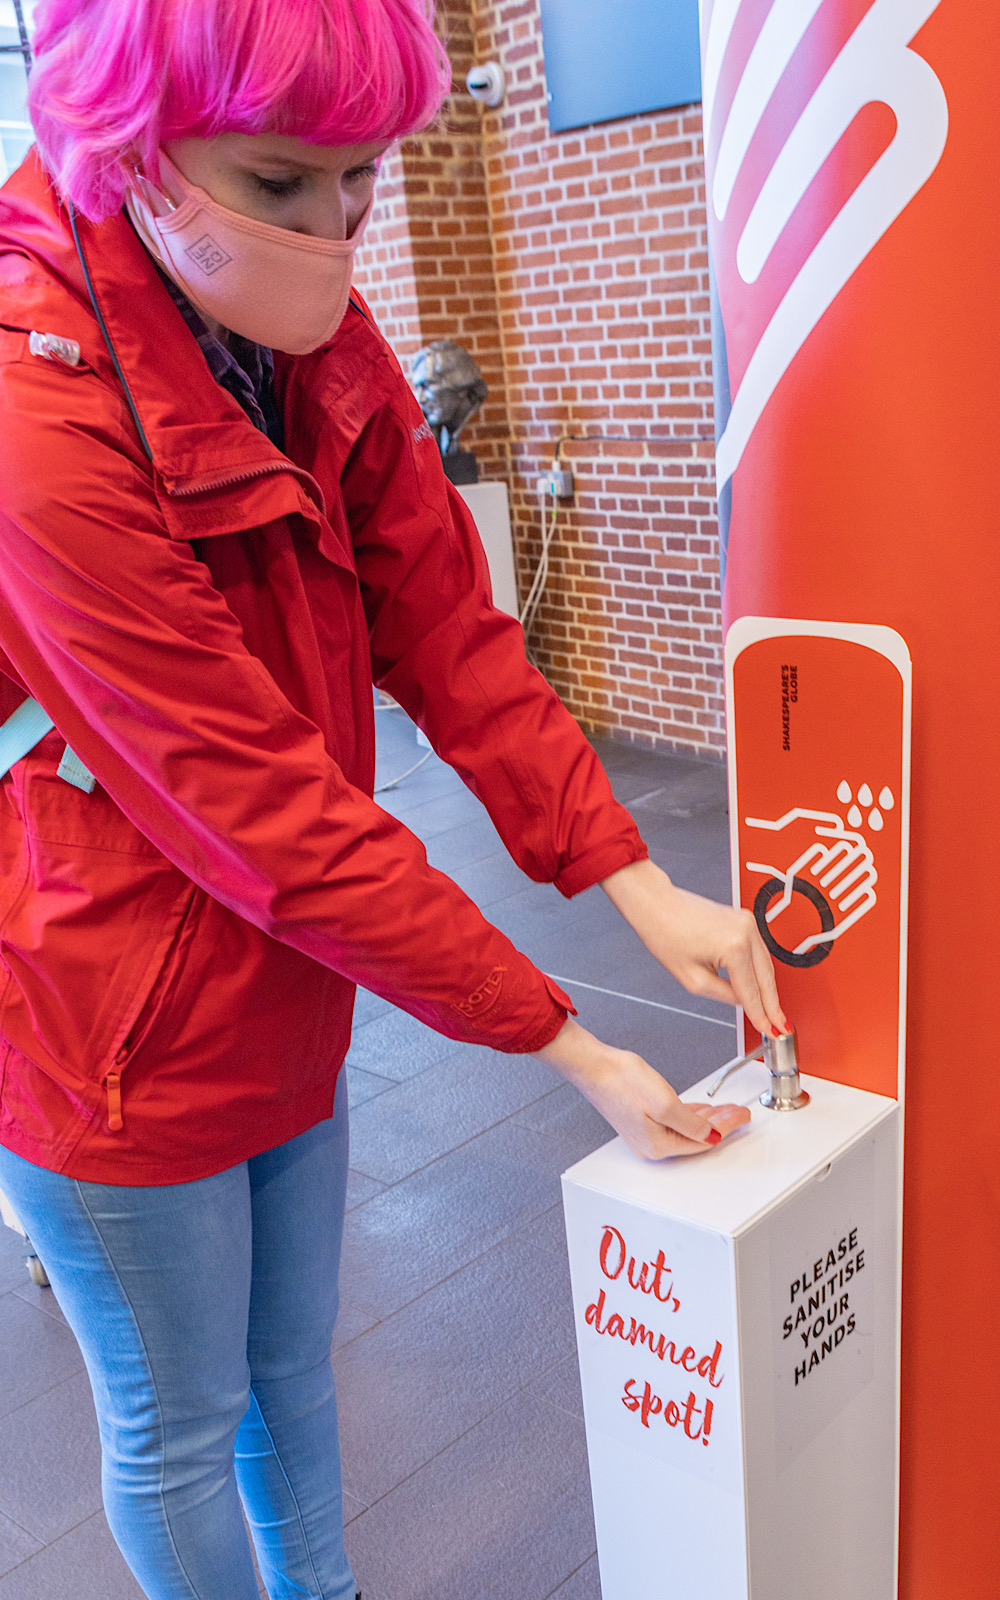 An audience member in a red jacket leans down to sanitise her hands at a sanitiser station